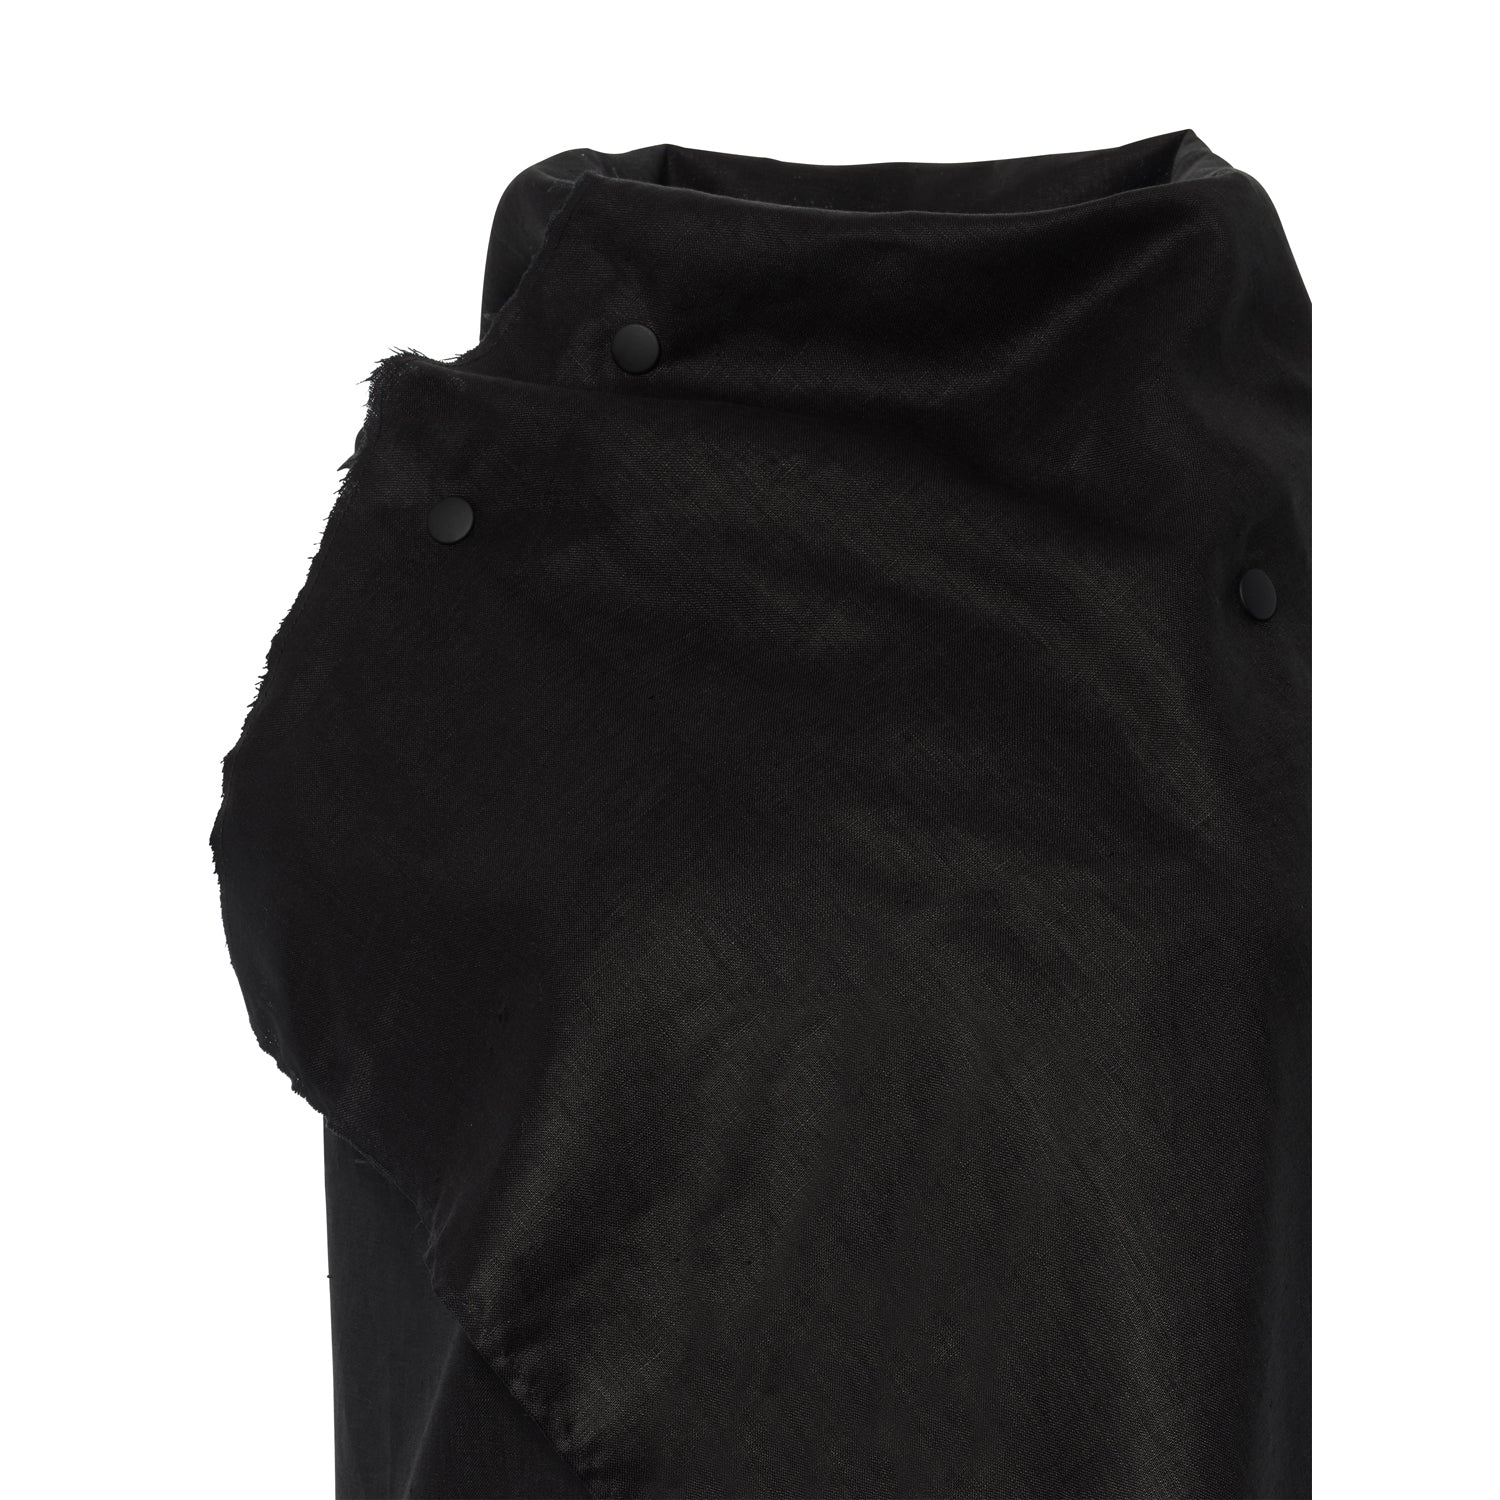 Close up of a summer linen vest black on black. High neck options or low neck by Malaika New York